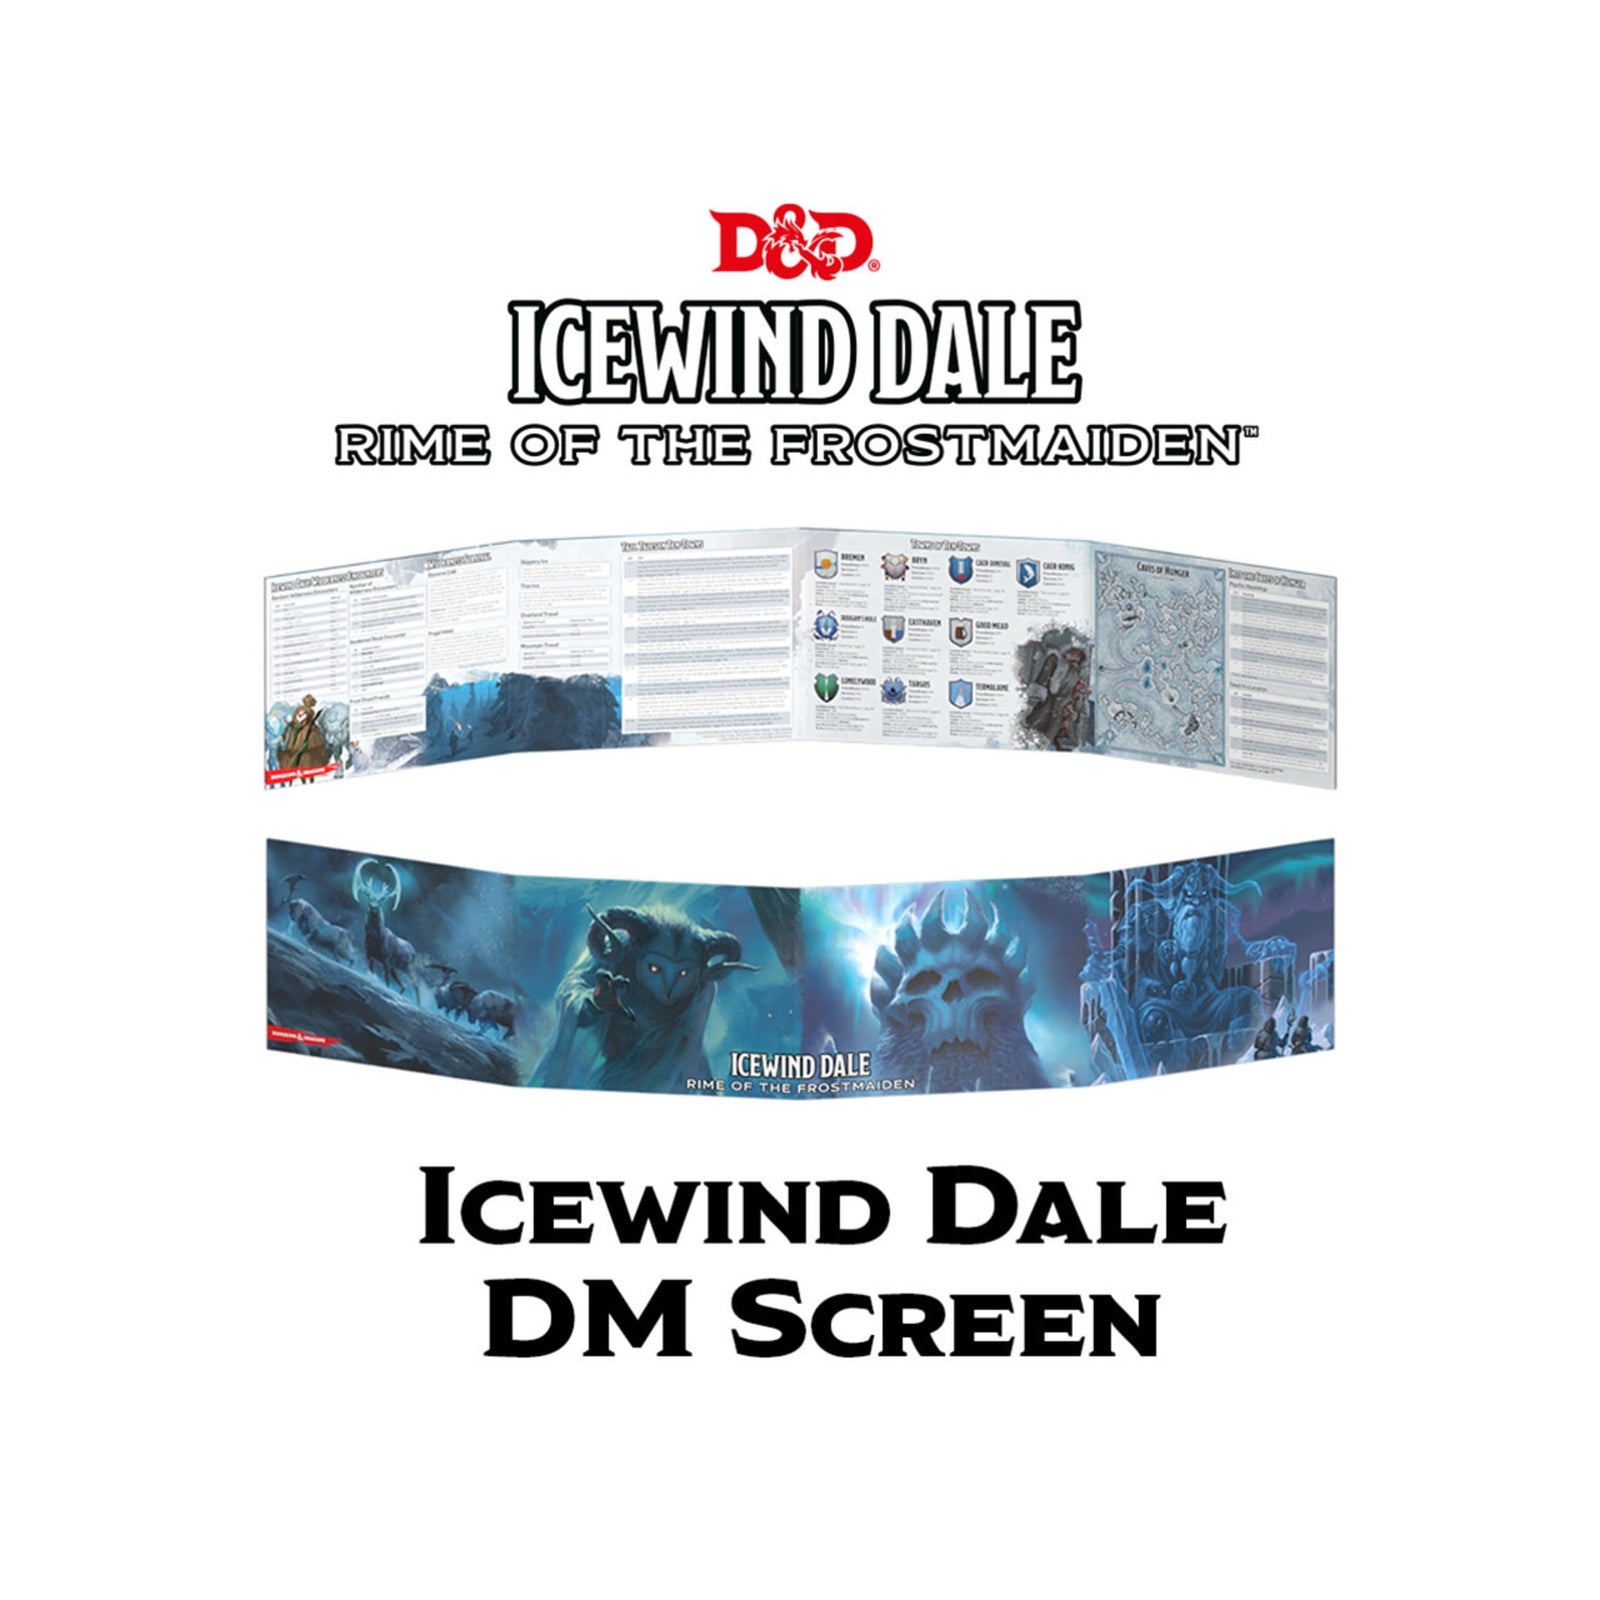 Icewind Dale Rime of the Frostmaiden DM Screen